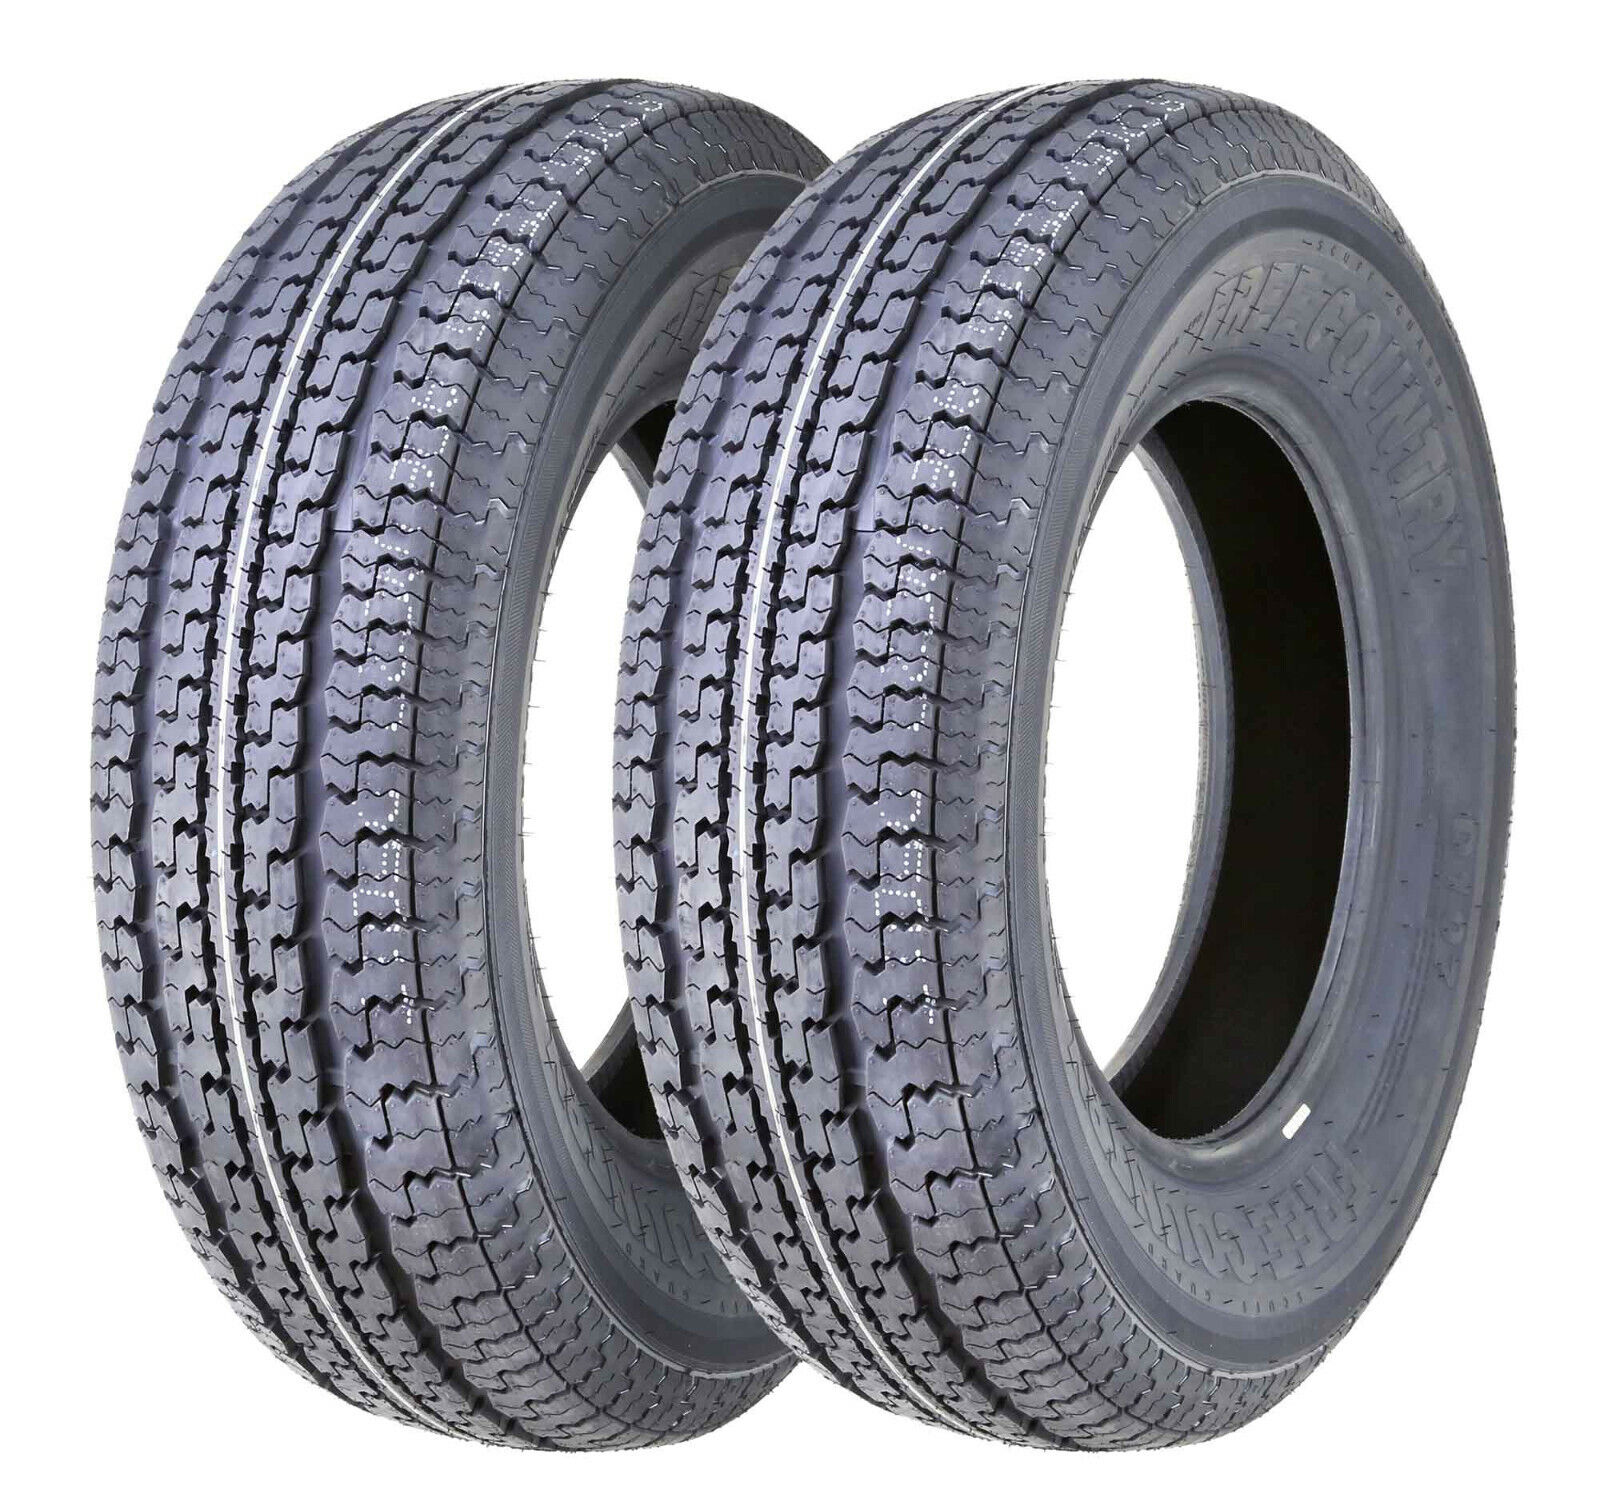 2 FREE COUNTRY Trailer Tires ST175/80R13 Radial 8 Ply LR D Speed M w/Scuff Guard